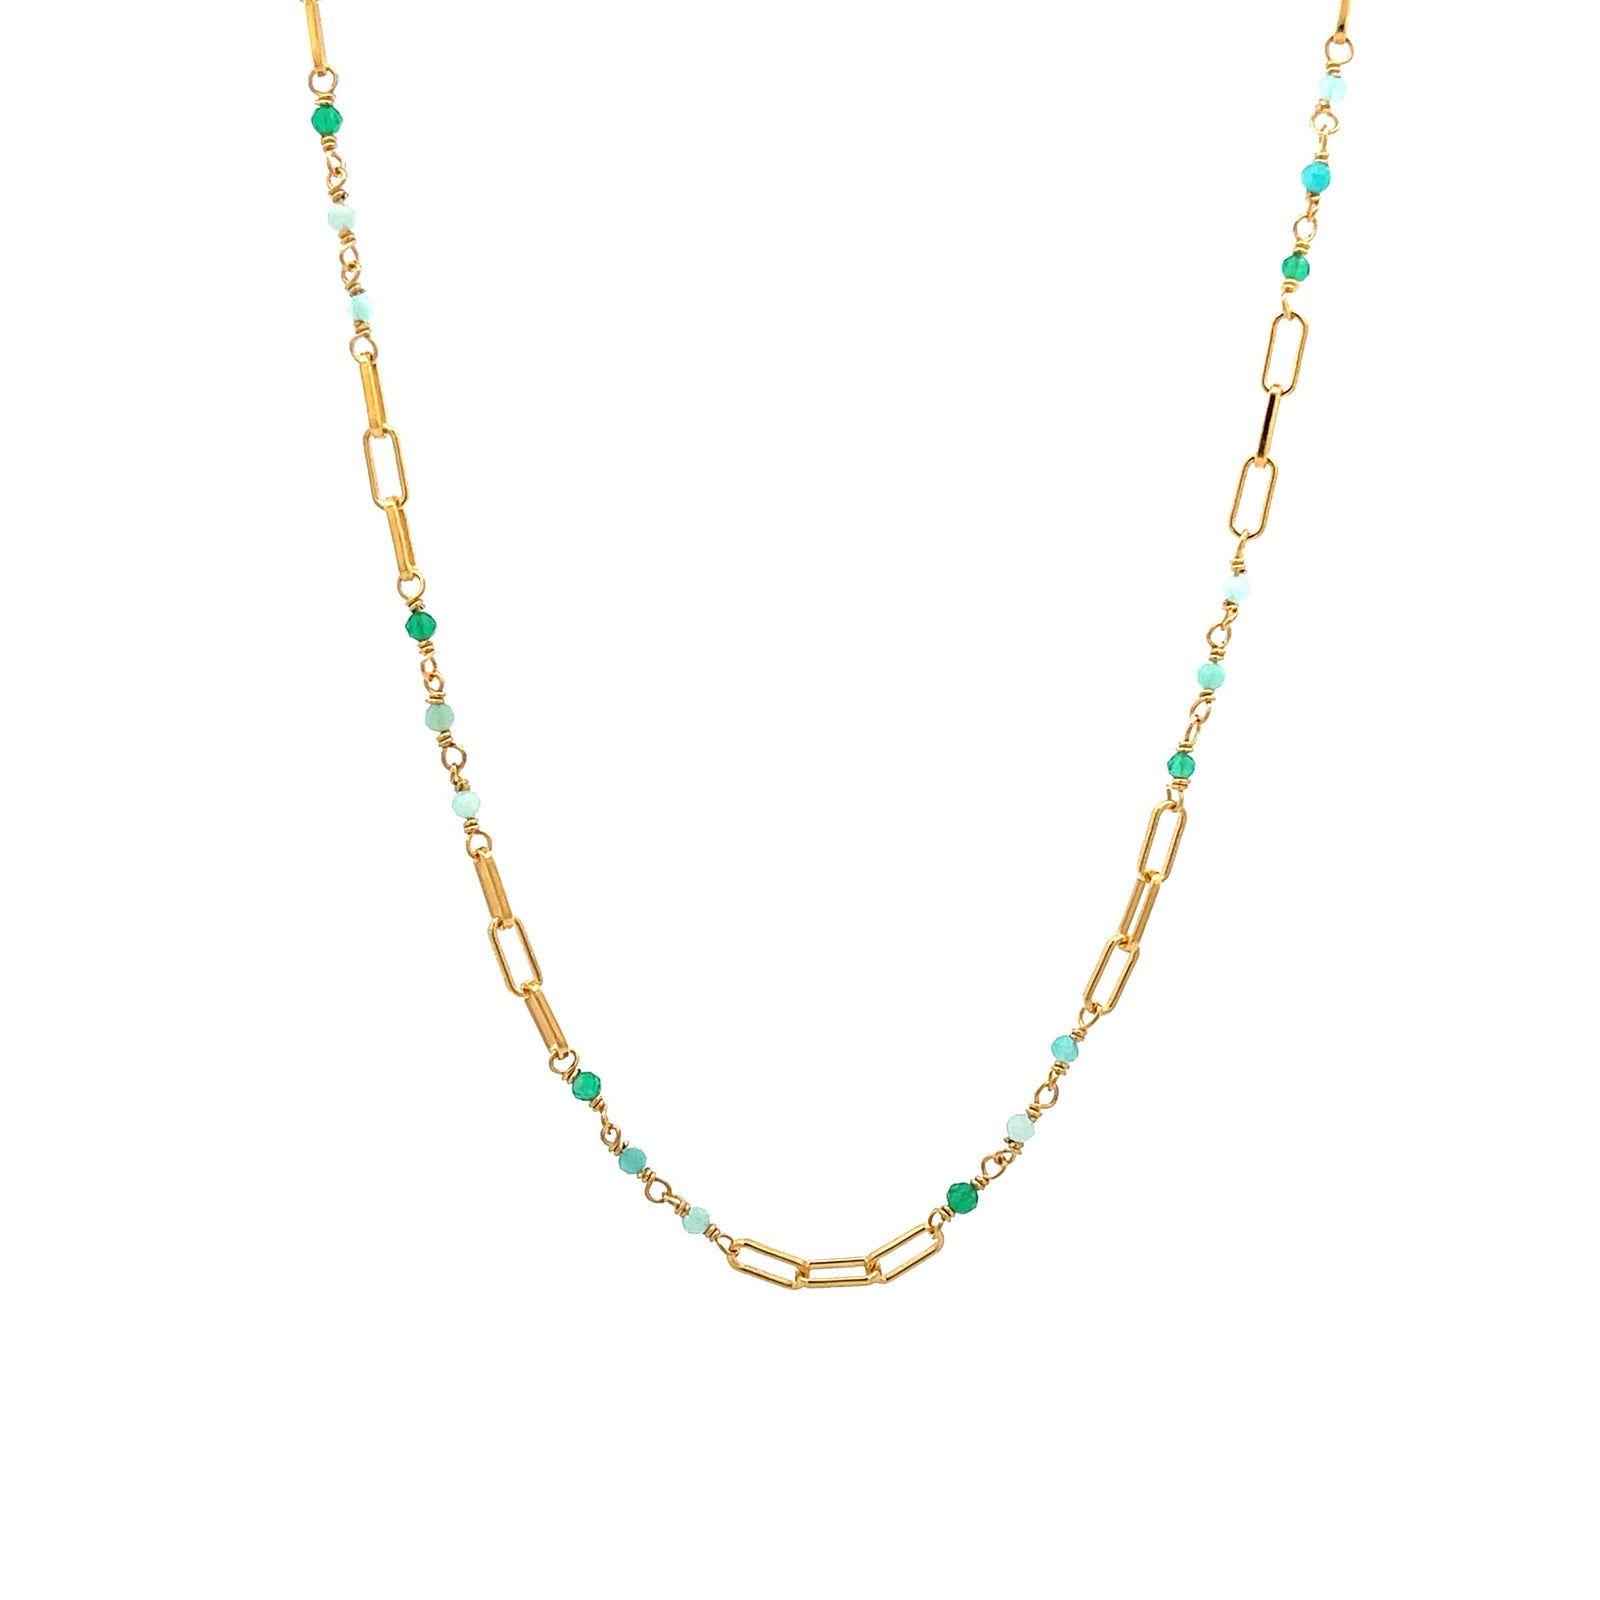 Buy FOREST CLIP CHAIN & BEADS NECKLACE || Gosia Orlowska Necklace